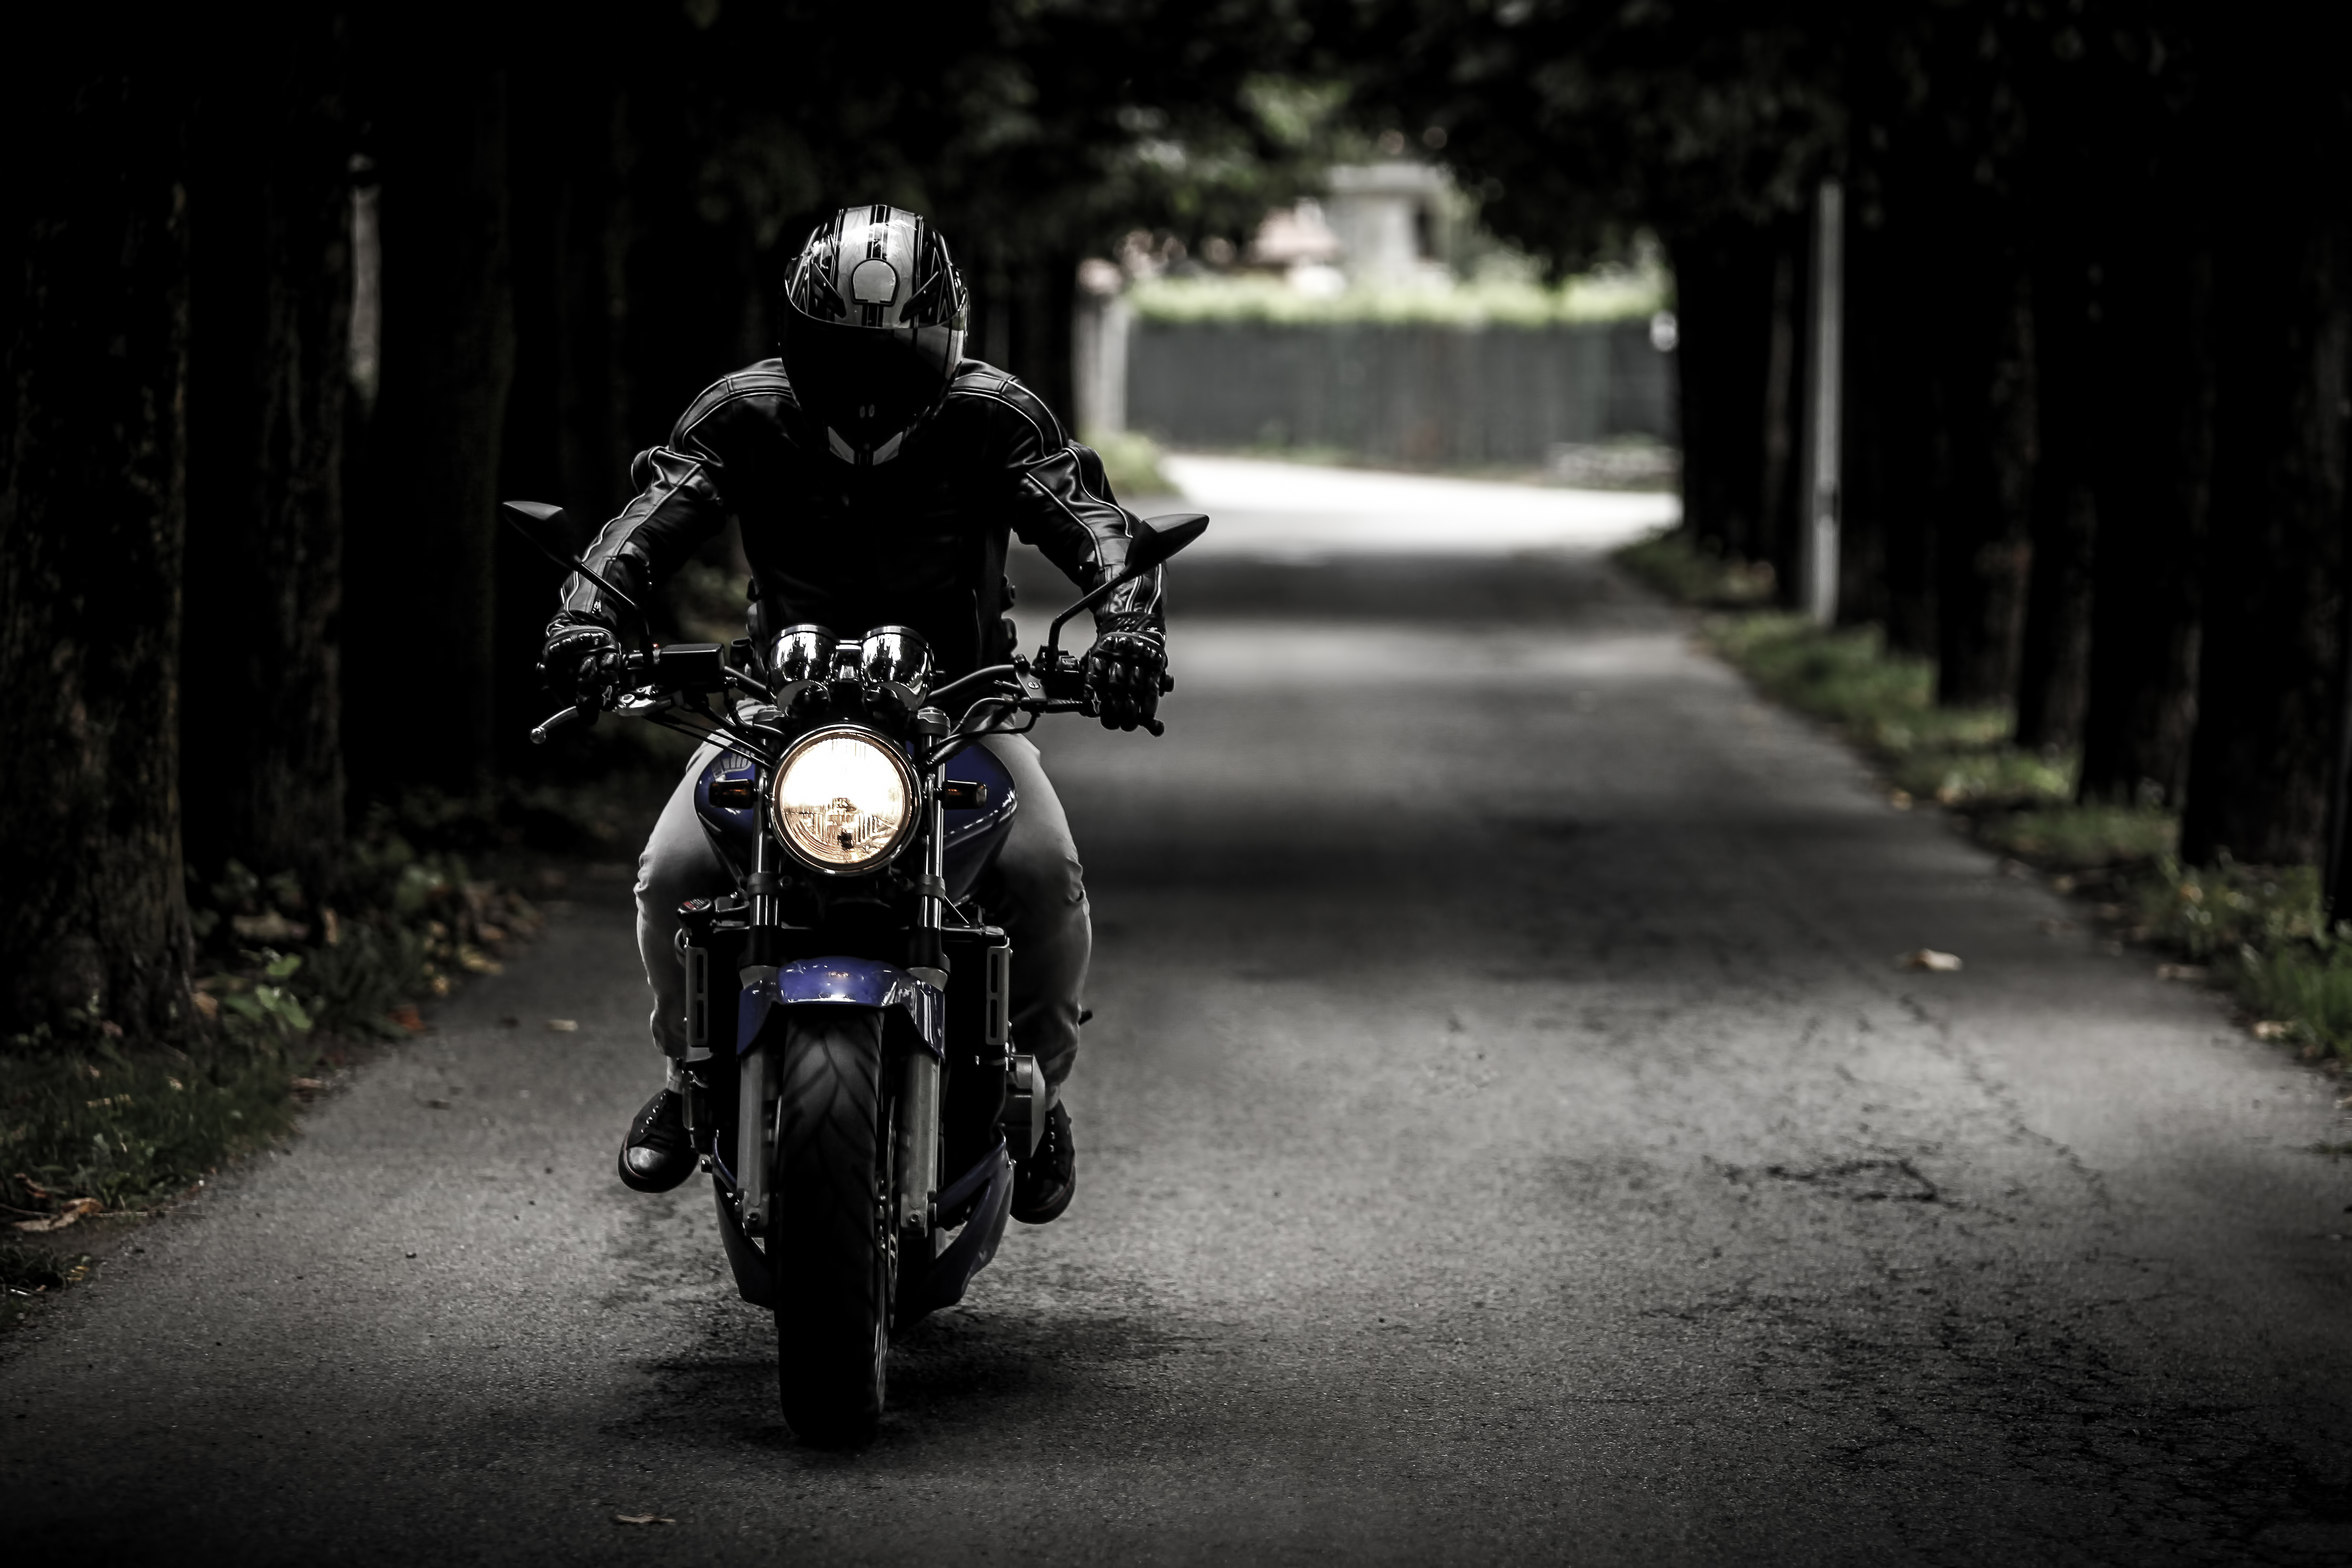 Motorcycle asset recovery is a highly specialized segment, and Millennium has an entire team dedicated to motorcycles.